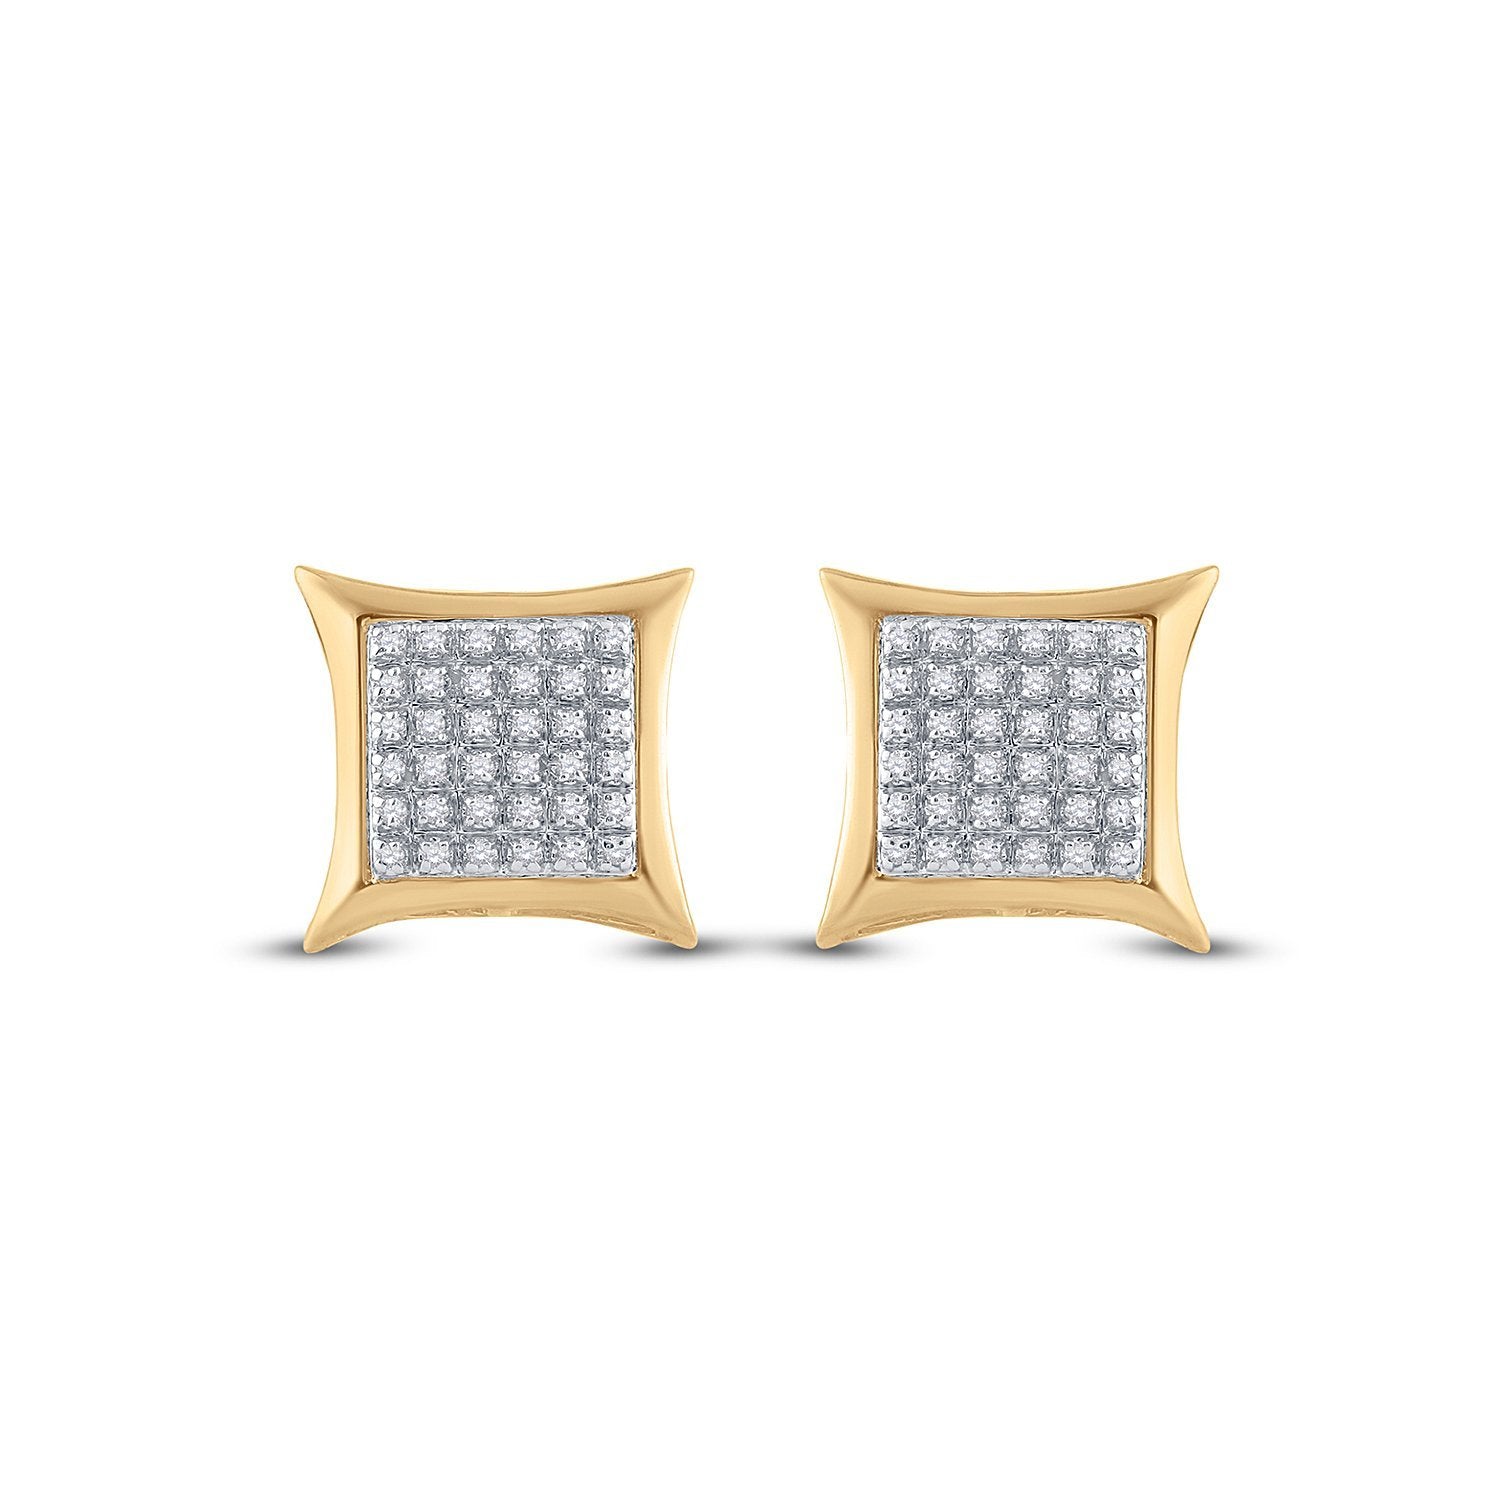 10kt Yellow Gold Mens Round Diamond Kite Square Earrings 1/5 Cttw